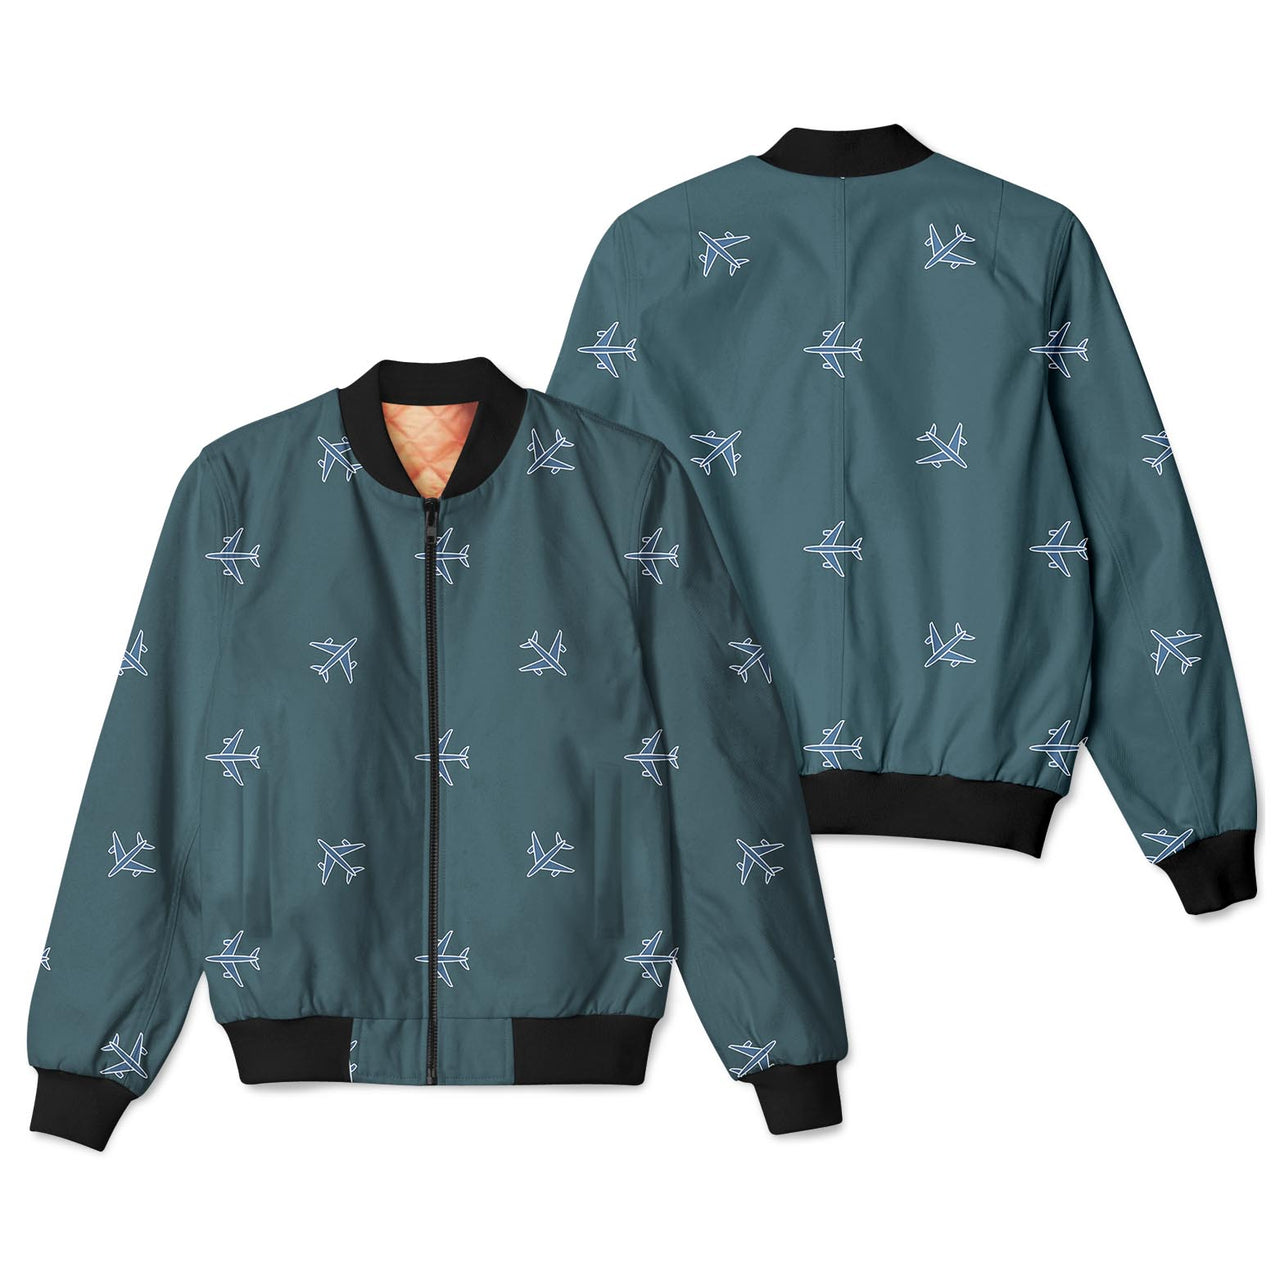 Nice Airplanes (Green) Designed 3D Pilot Bomber Jackets